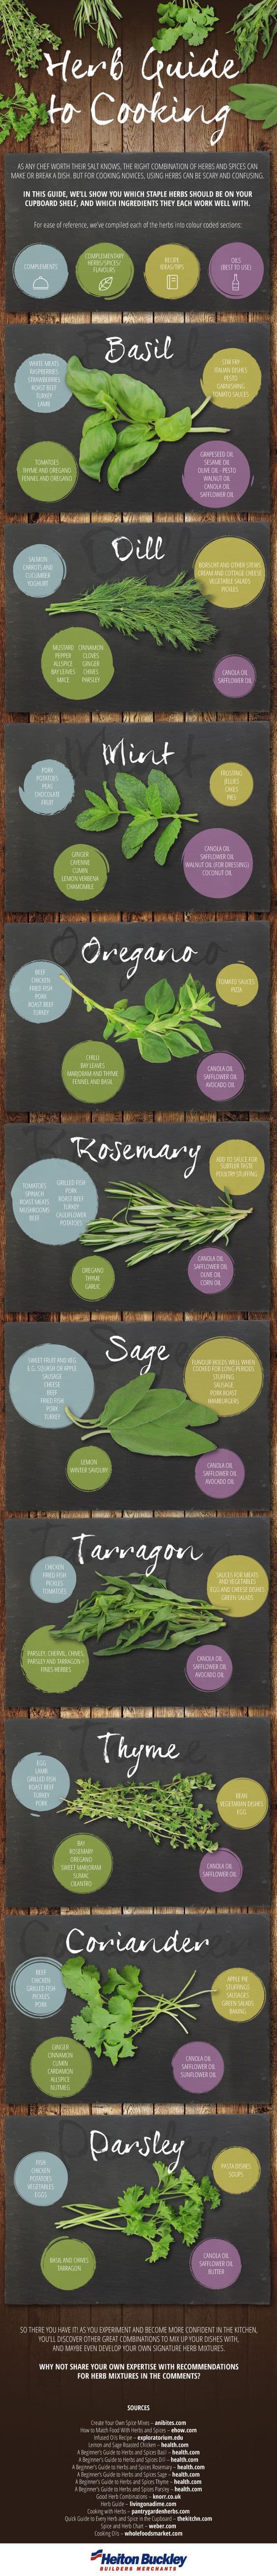 Guide To Cooking With Herbs